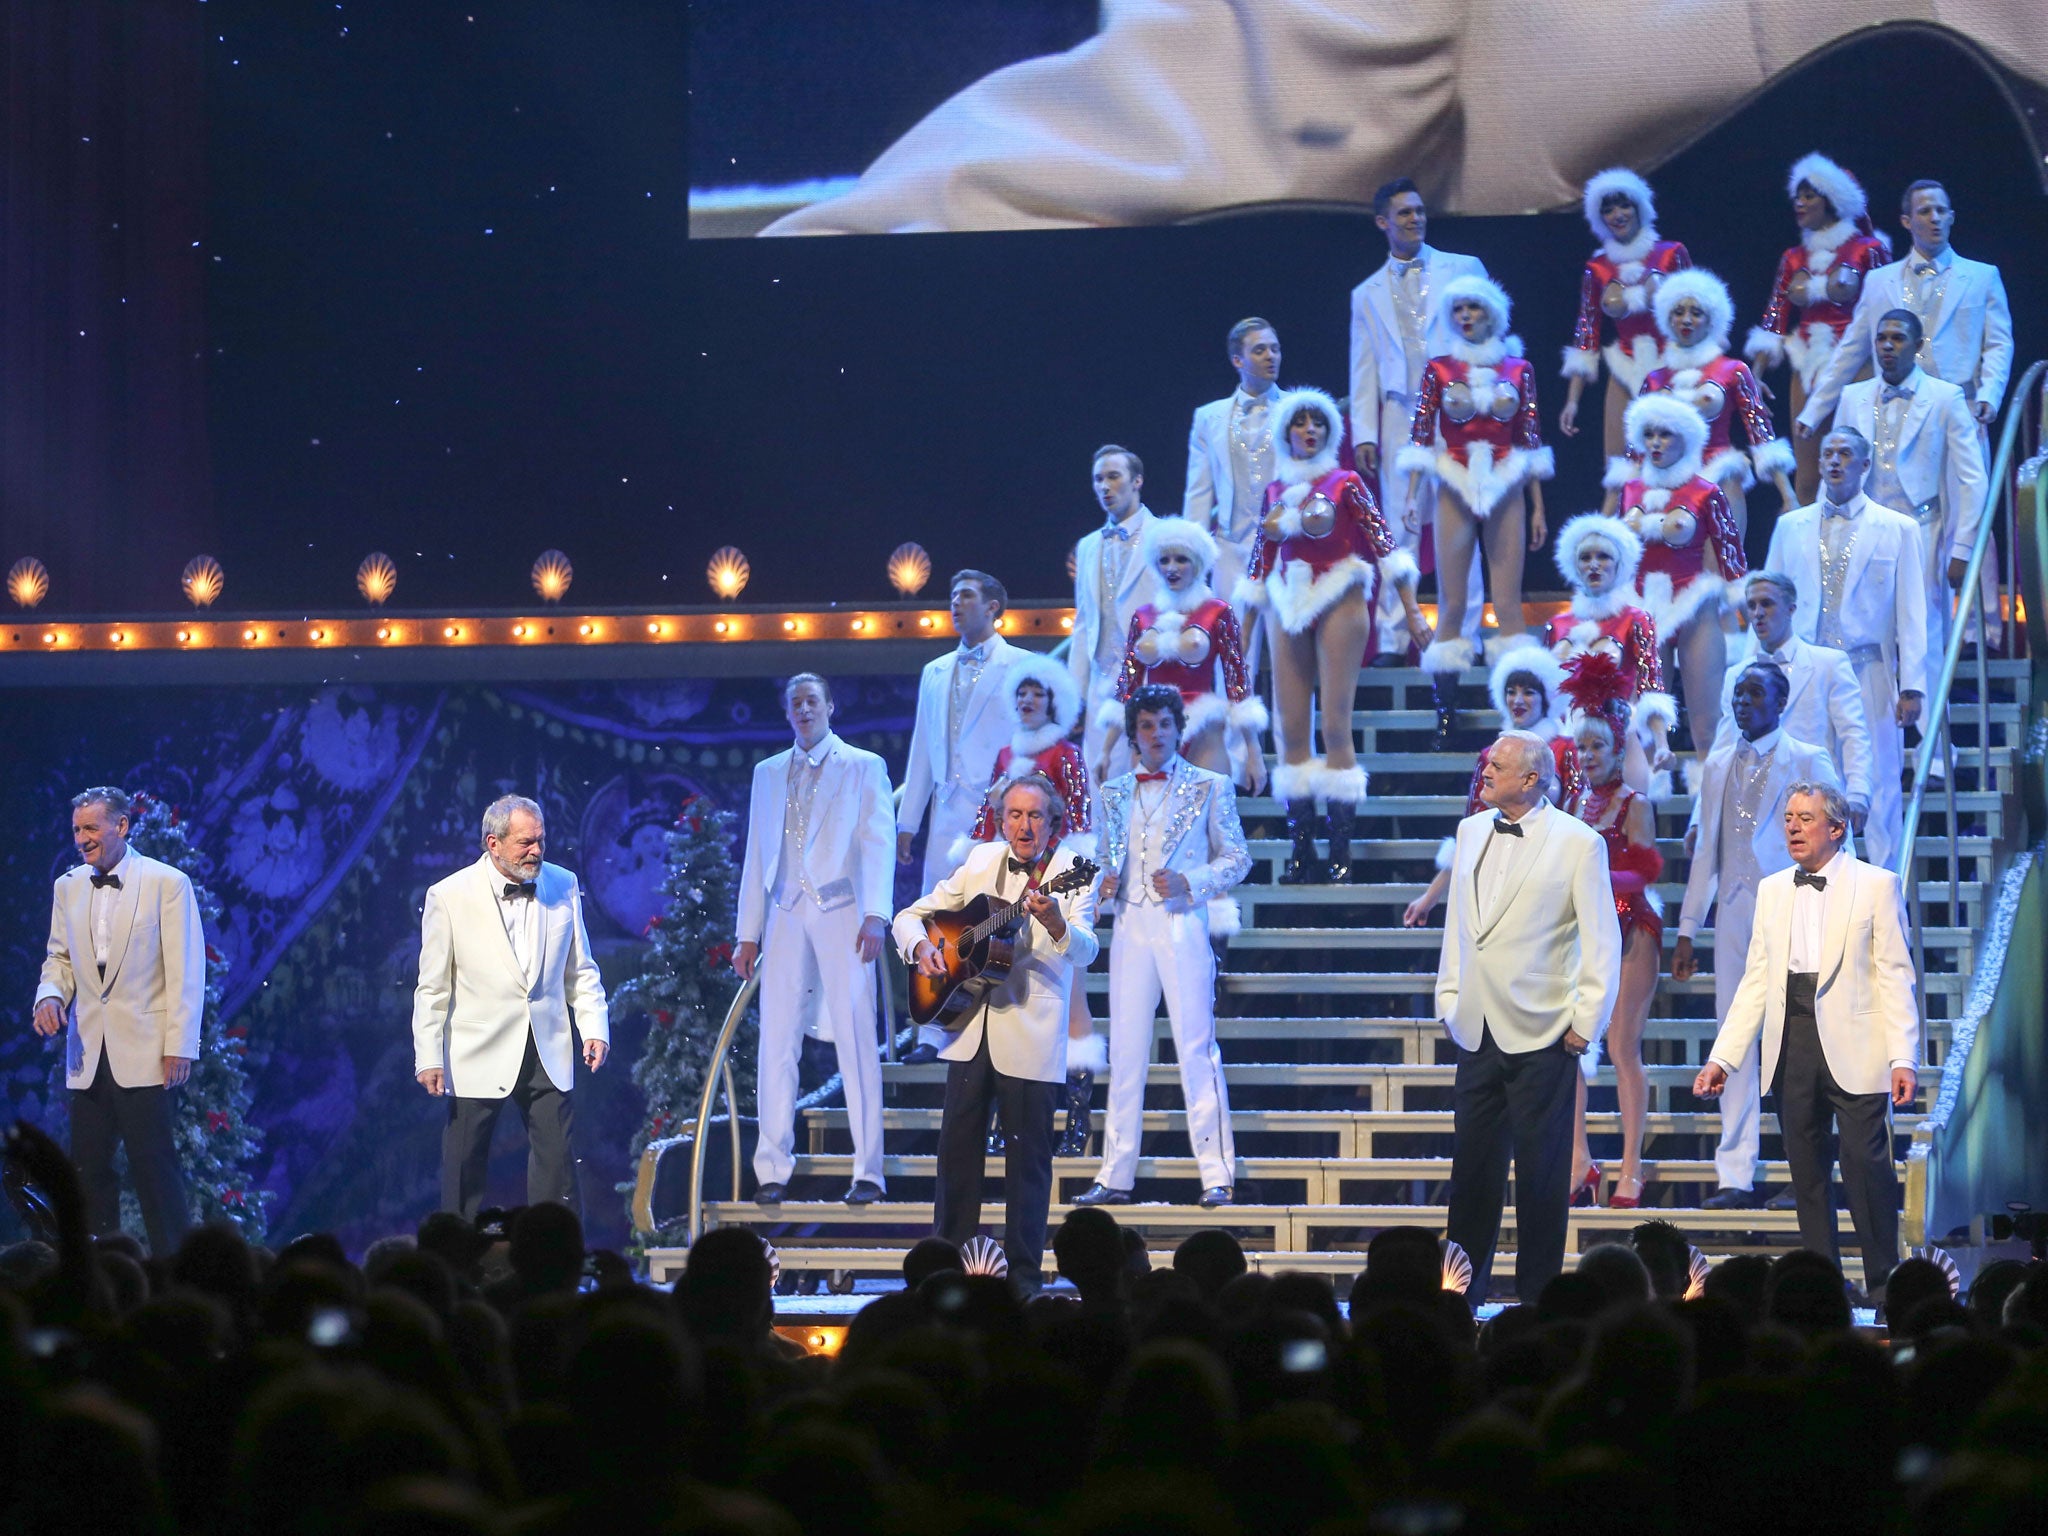 Monty Python Singing Always Look on the Bright Side of Life at the O2 Arena in London